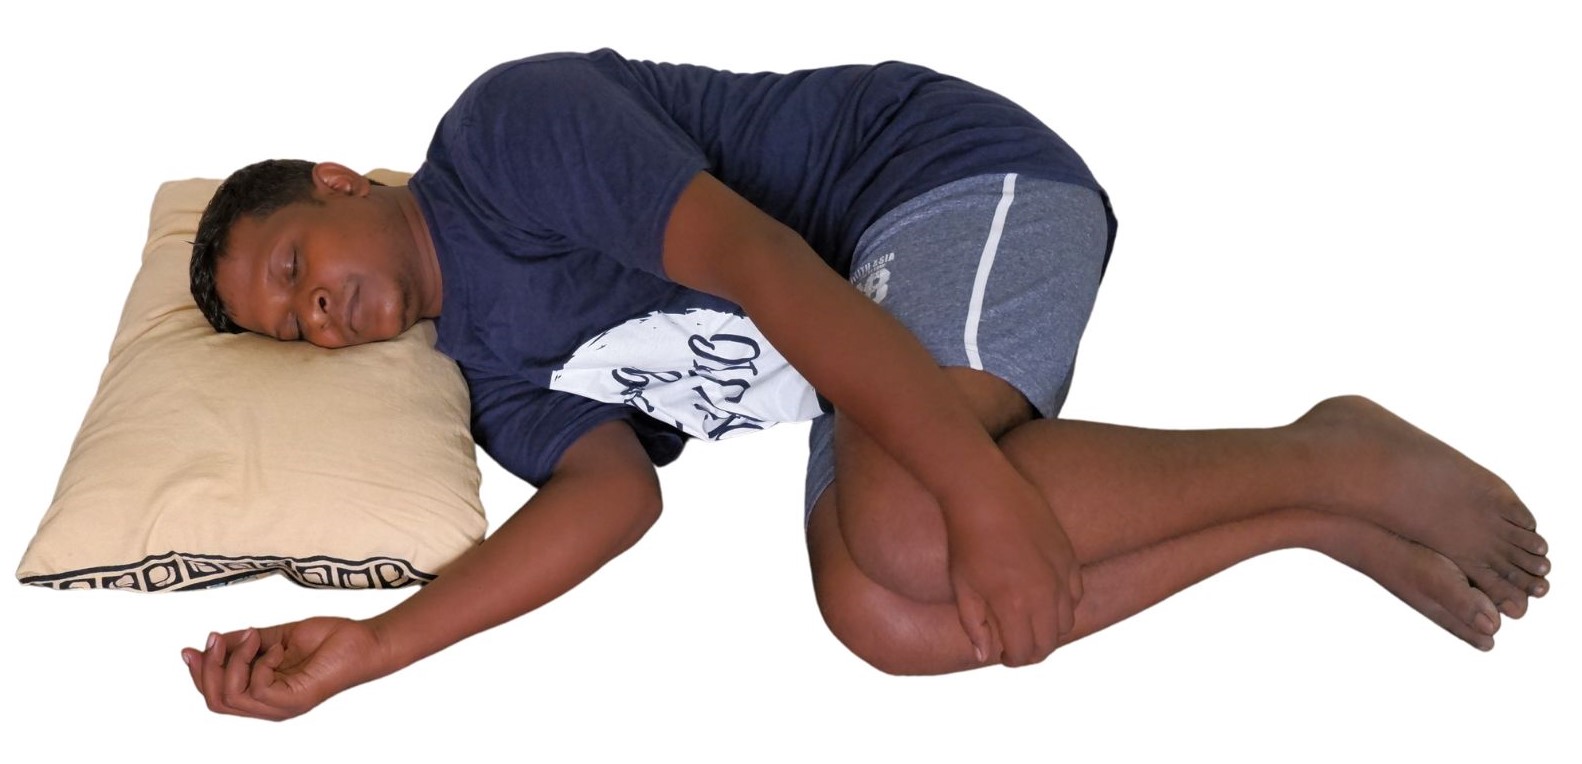 Proper sleeping position – Relieve the pain